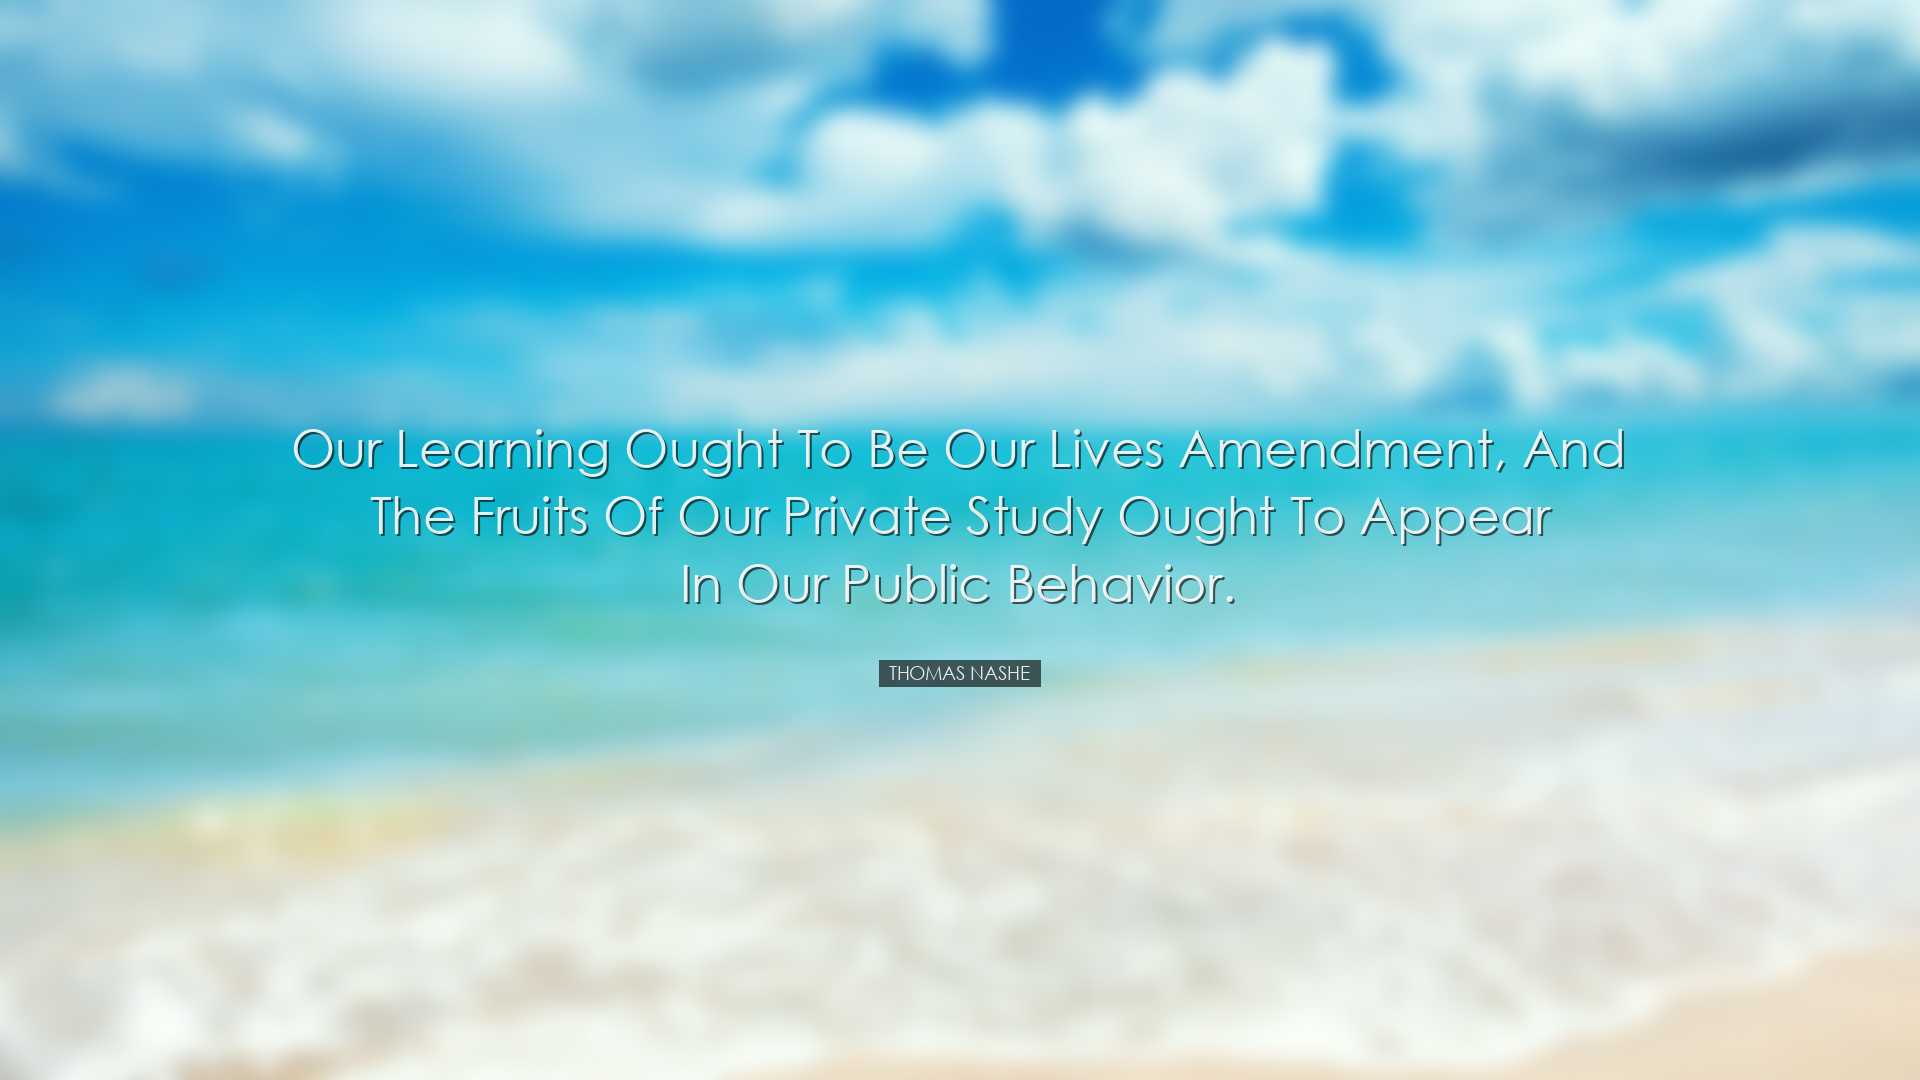 Our learning ought to be our lives amendment, and the fruits of ou